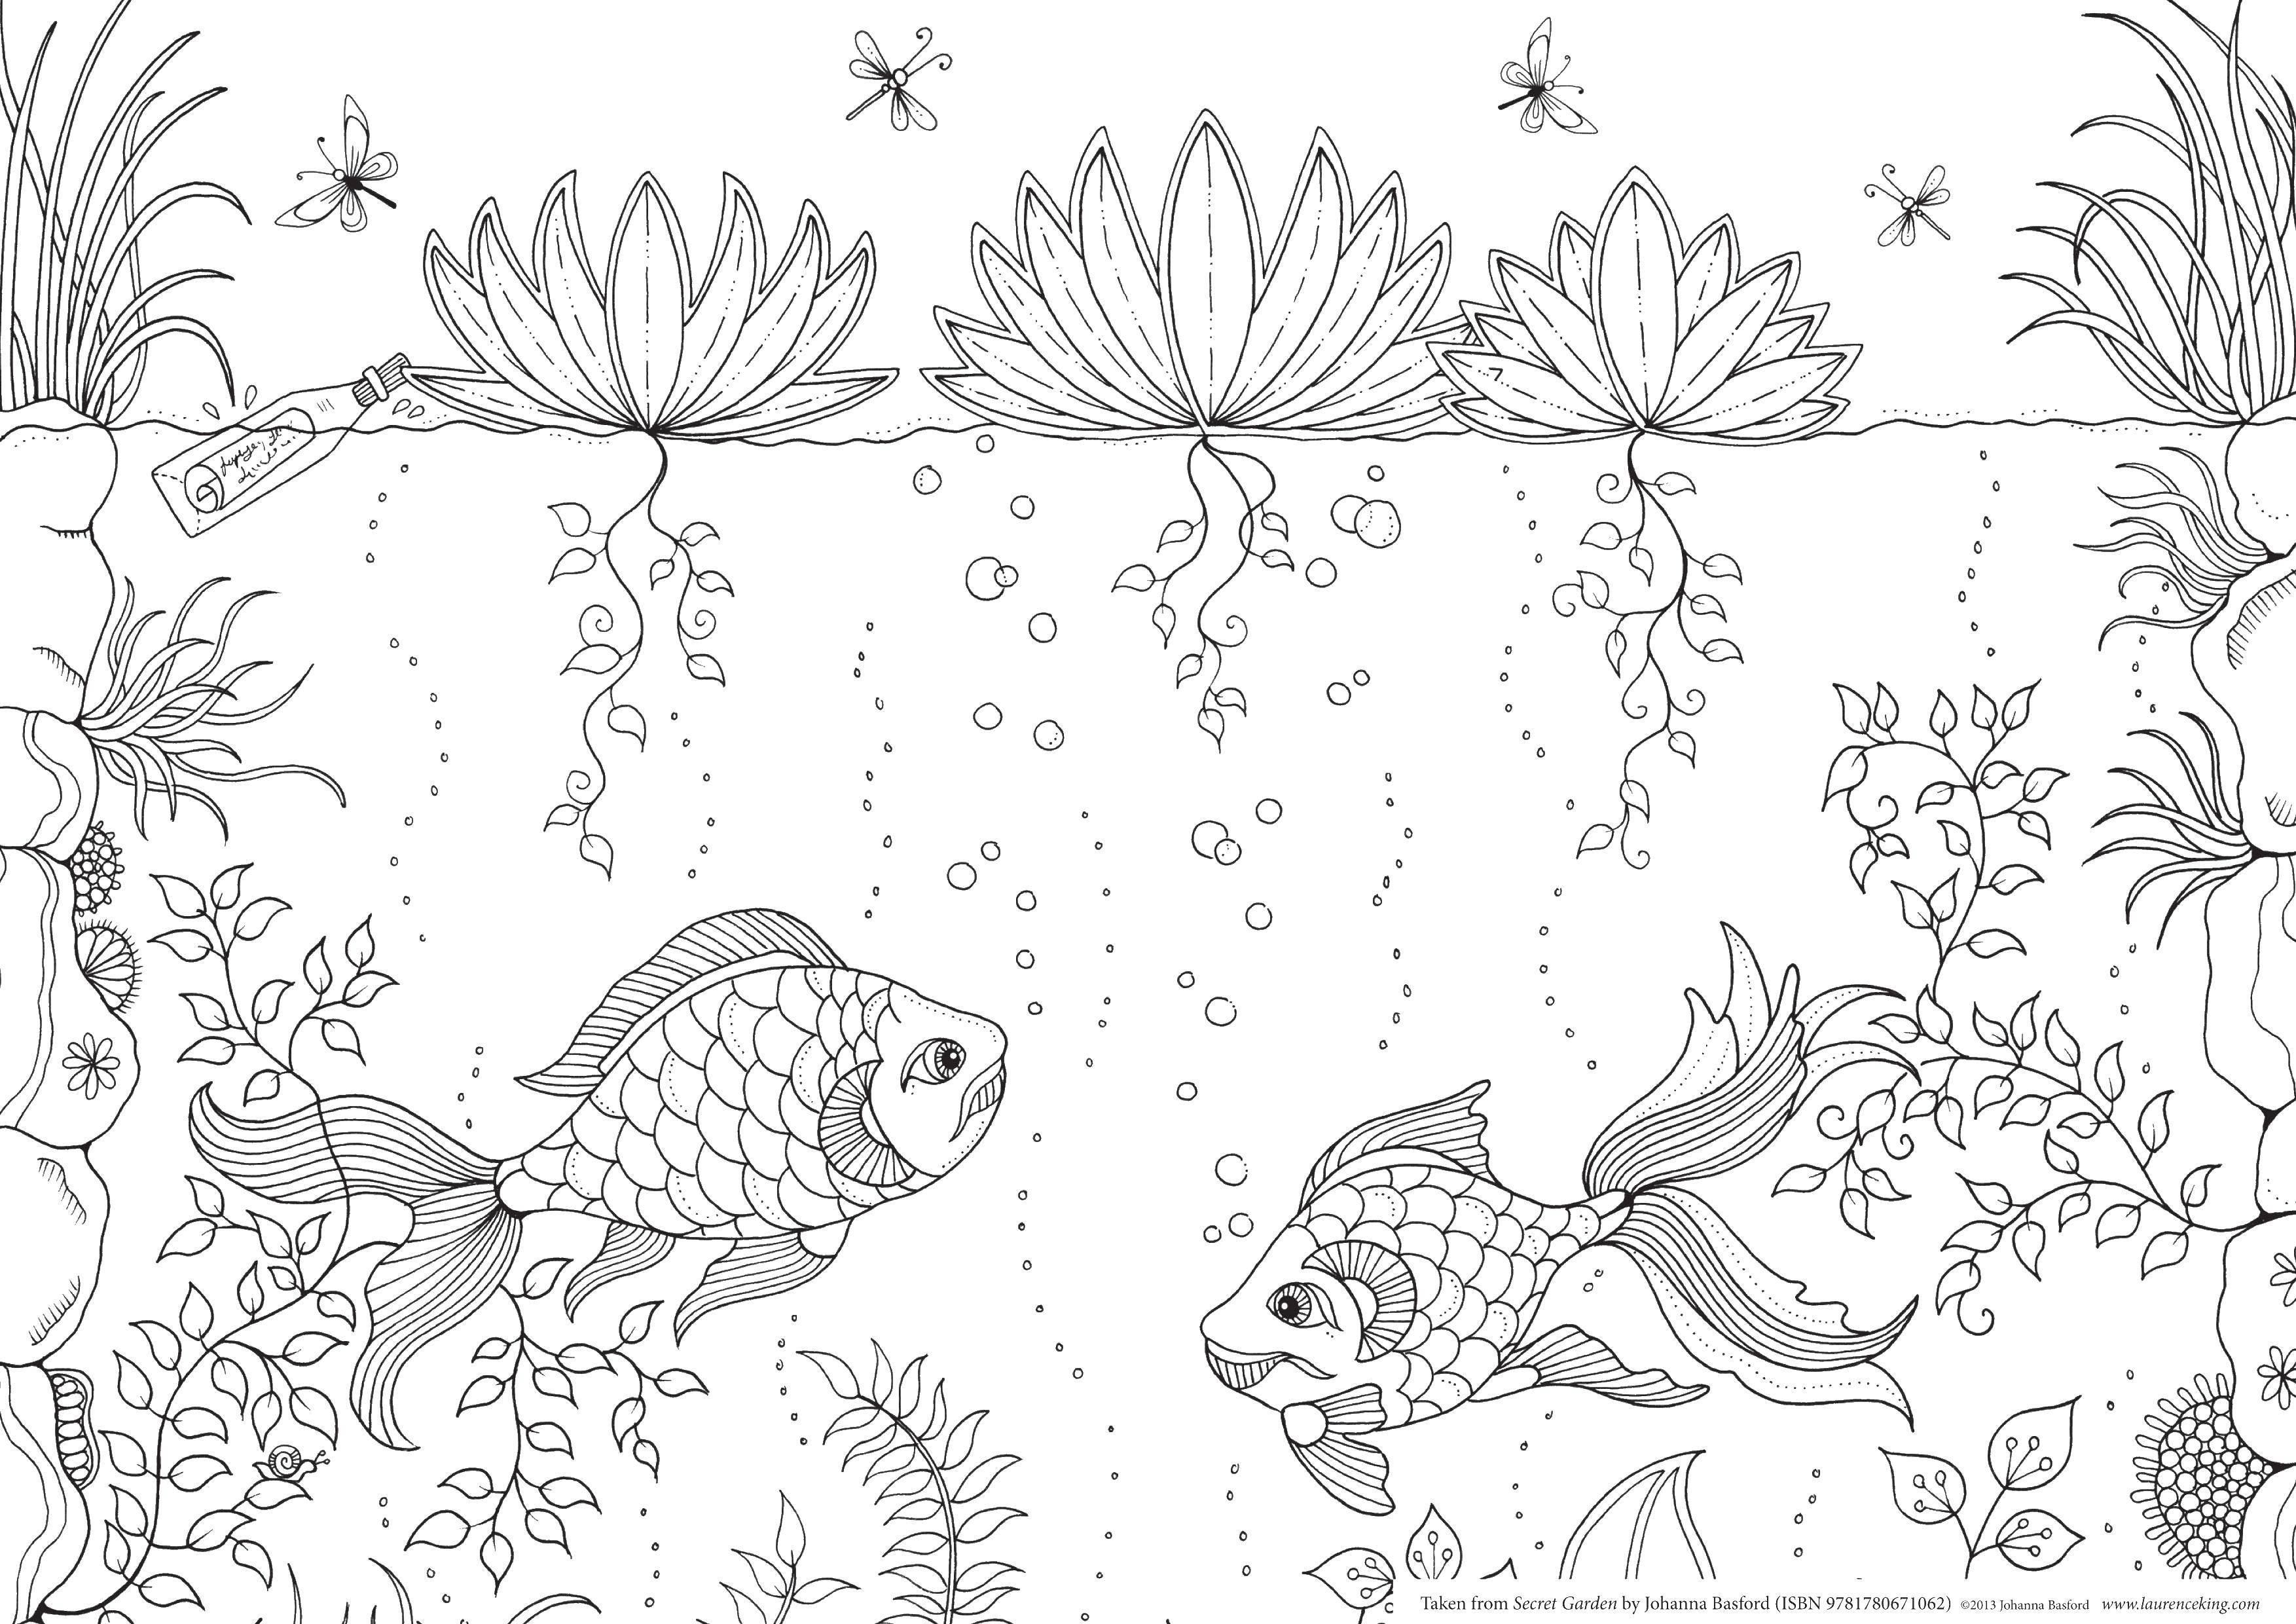 Coloring Fish plant. Category coloring. Tags:  fish, plant, water.